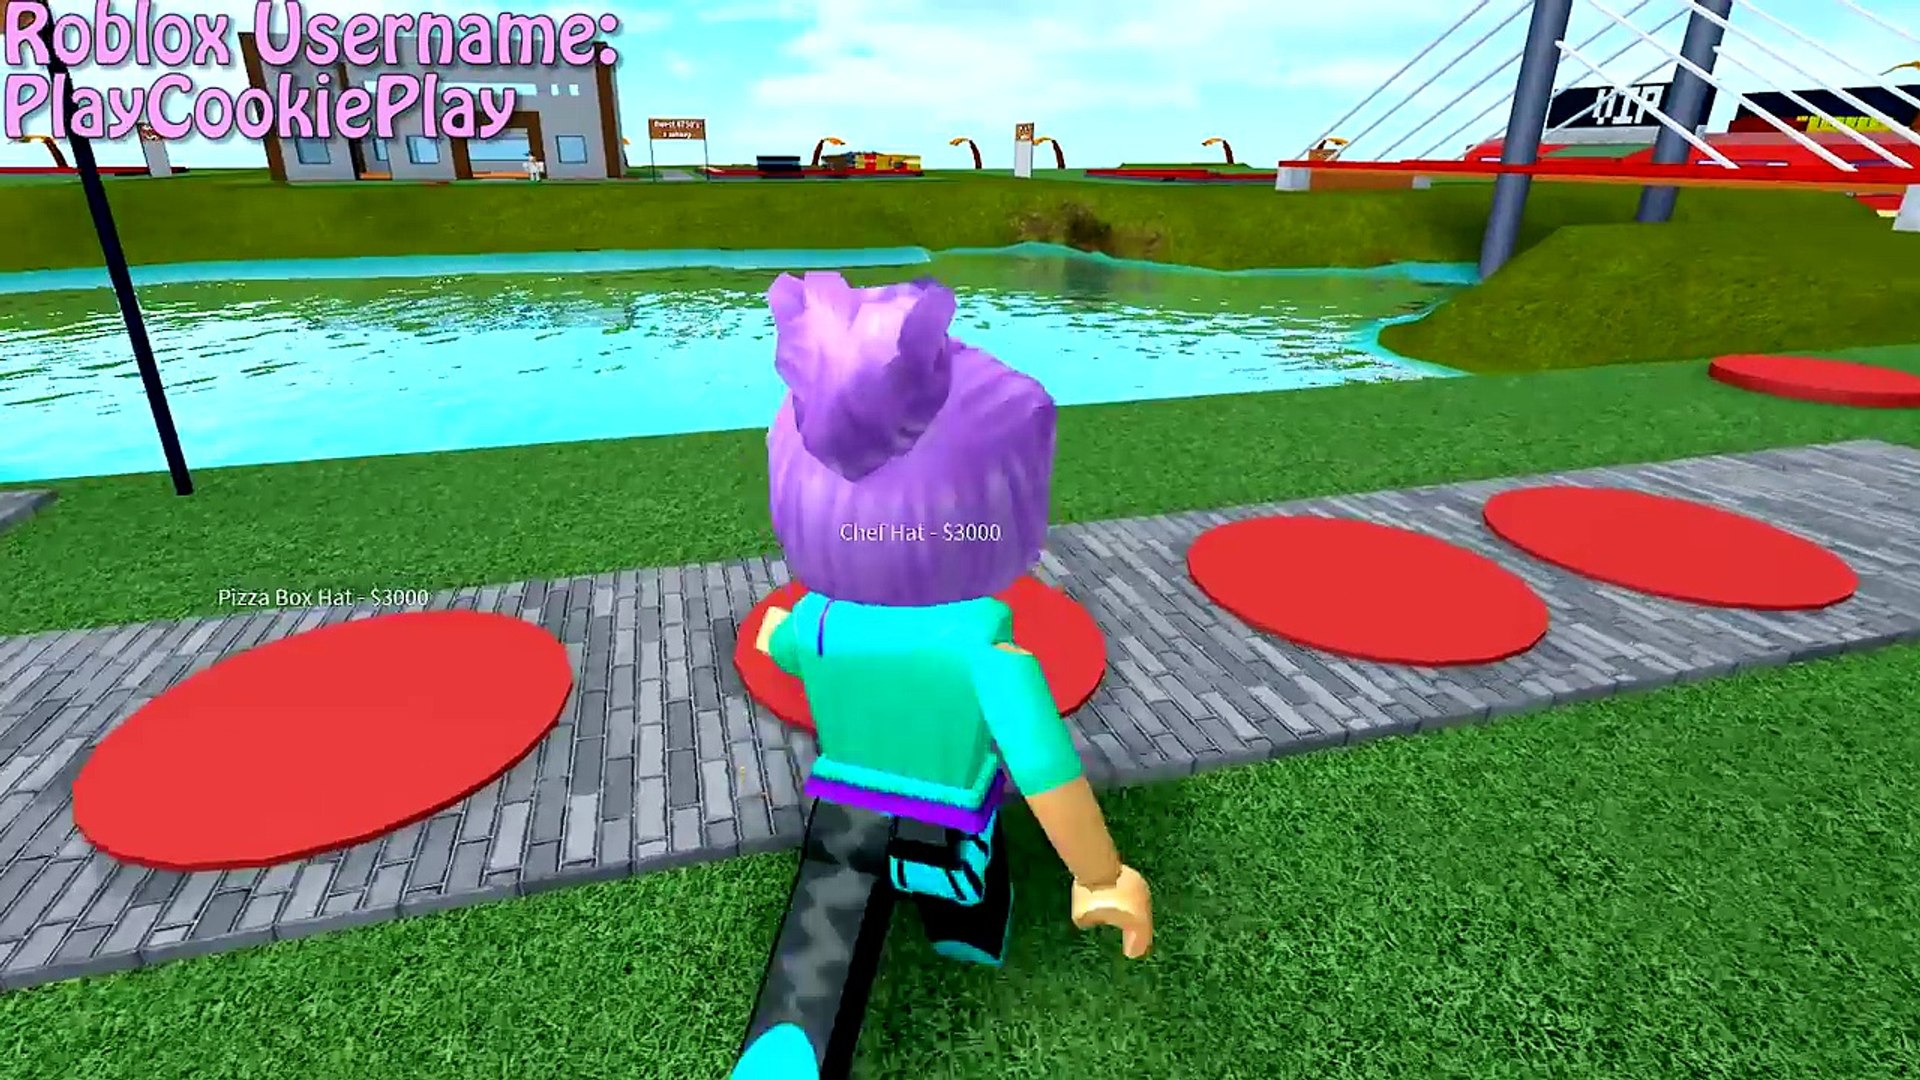 Roblox Pizza Fory Tycoon Building A Fast Food Restaurant Online Game Lets Play Video Dailymotion - adopt me baby kid looking for a family roblox let s play video game cookie swirl c video dailymotion